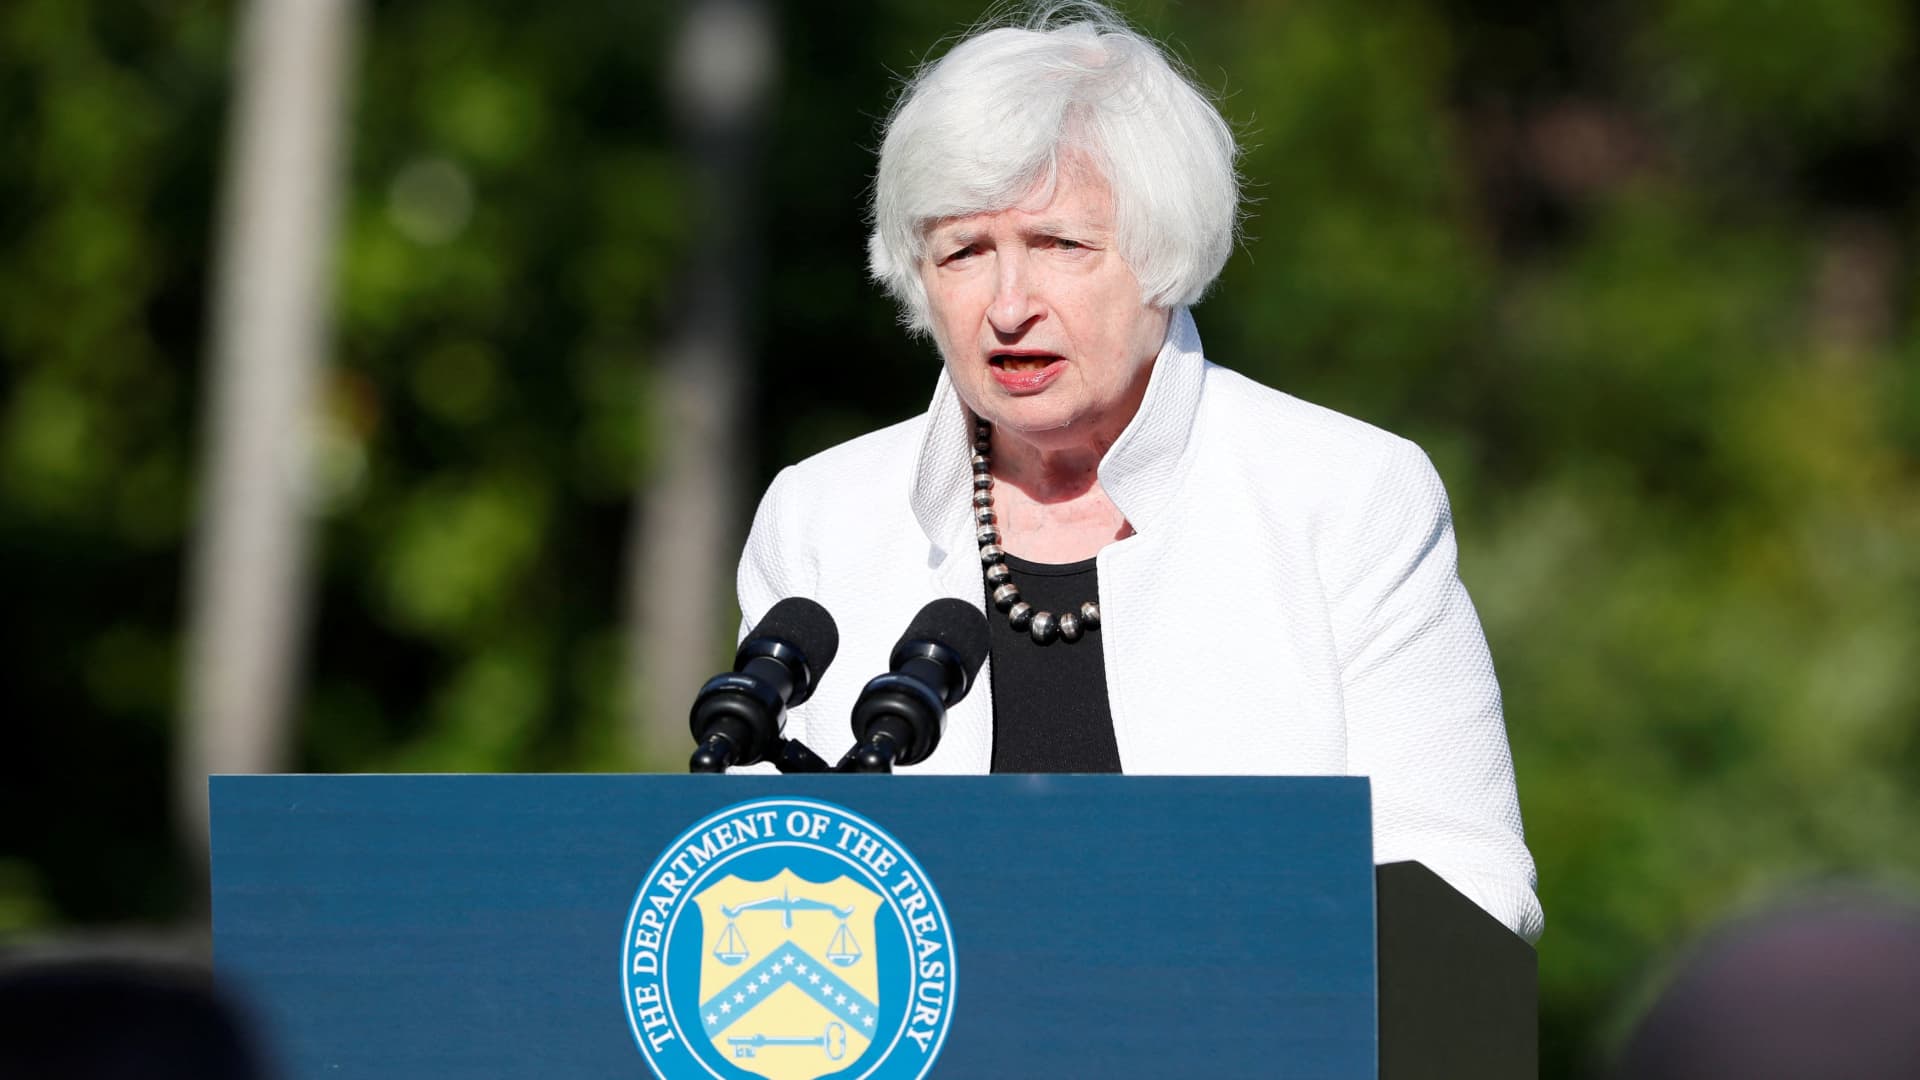 Yellen: These are the 4 top priorities for the nearly $80 billion in IRS funding